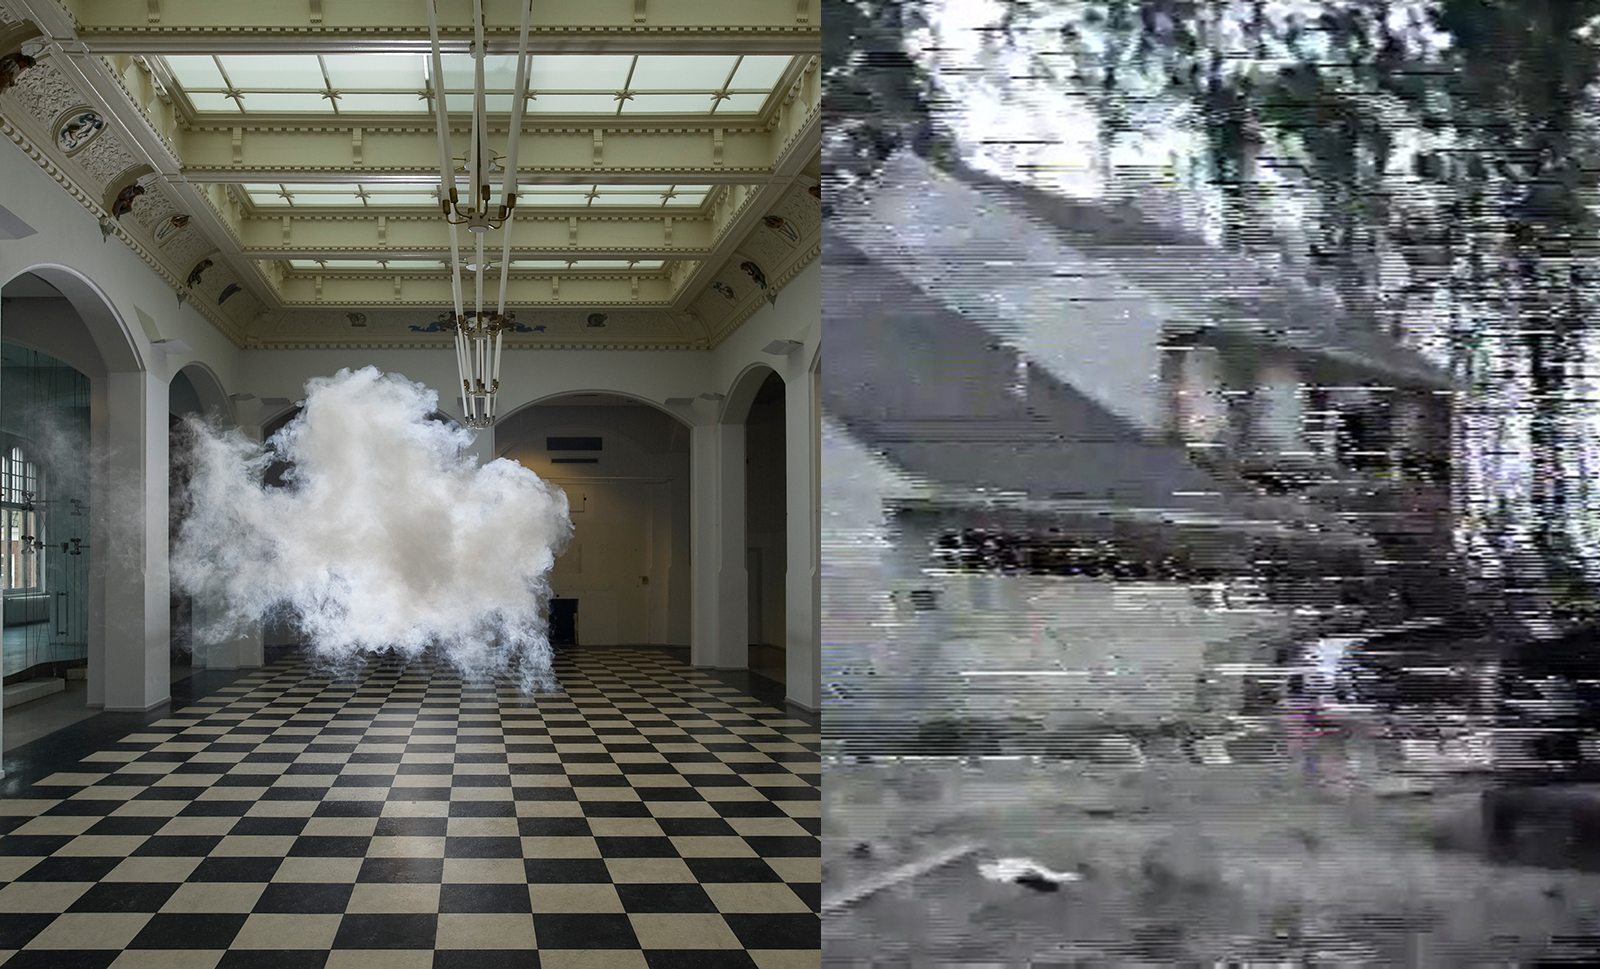 Left: Berndnaut Smilde, Until Askeaton has Street View, 2009 – 2012 (detail). Right: Jason Hanasik, We always thought the walls would protect us, but suddenly realized they were as weak as our frames, 2013 (still).
